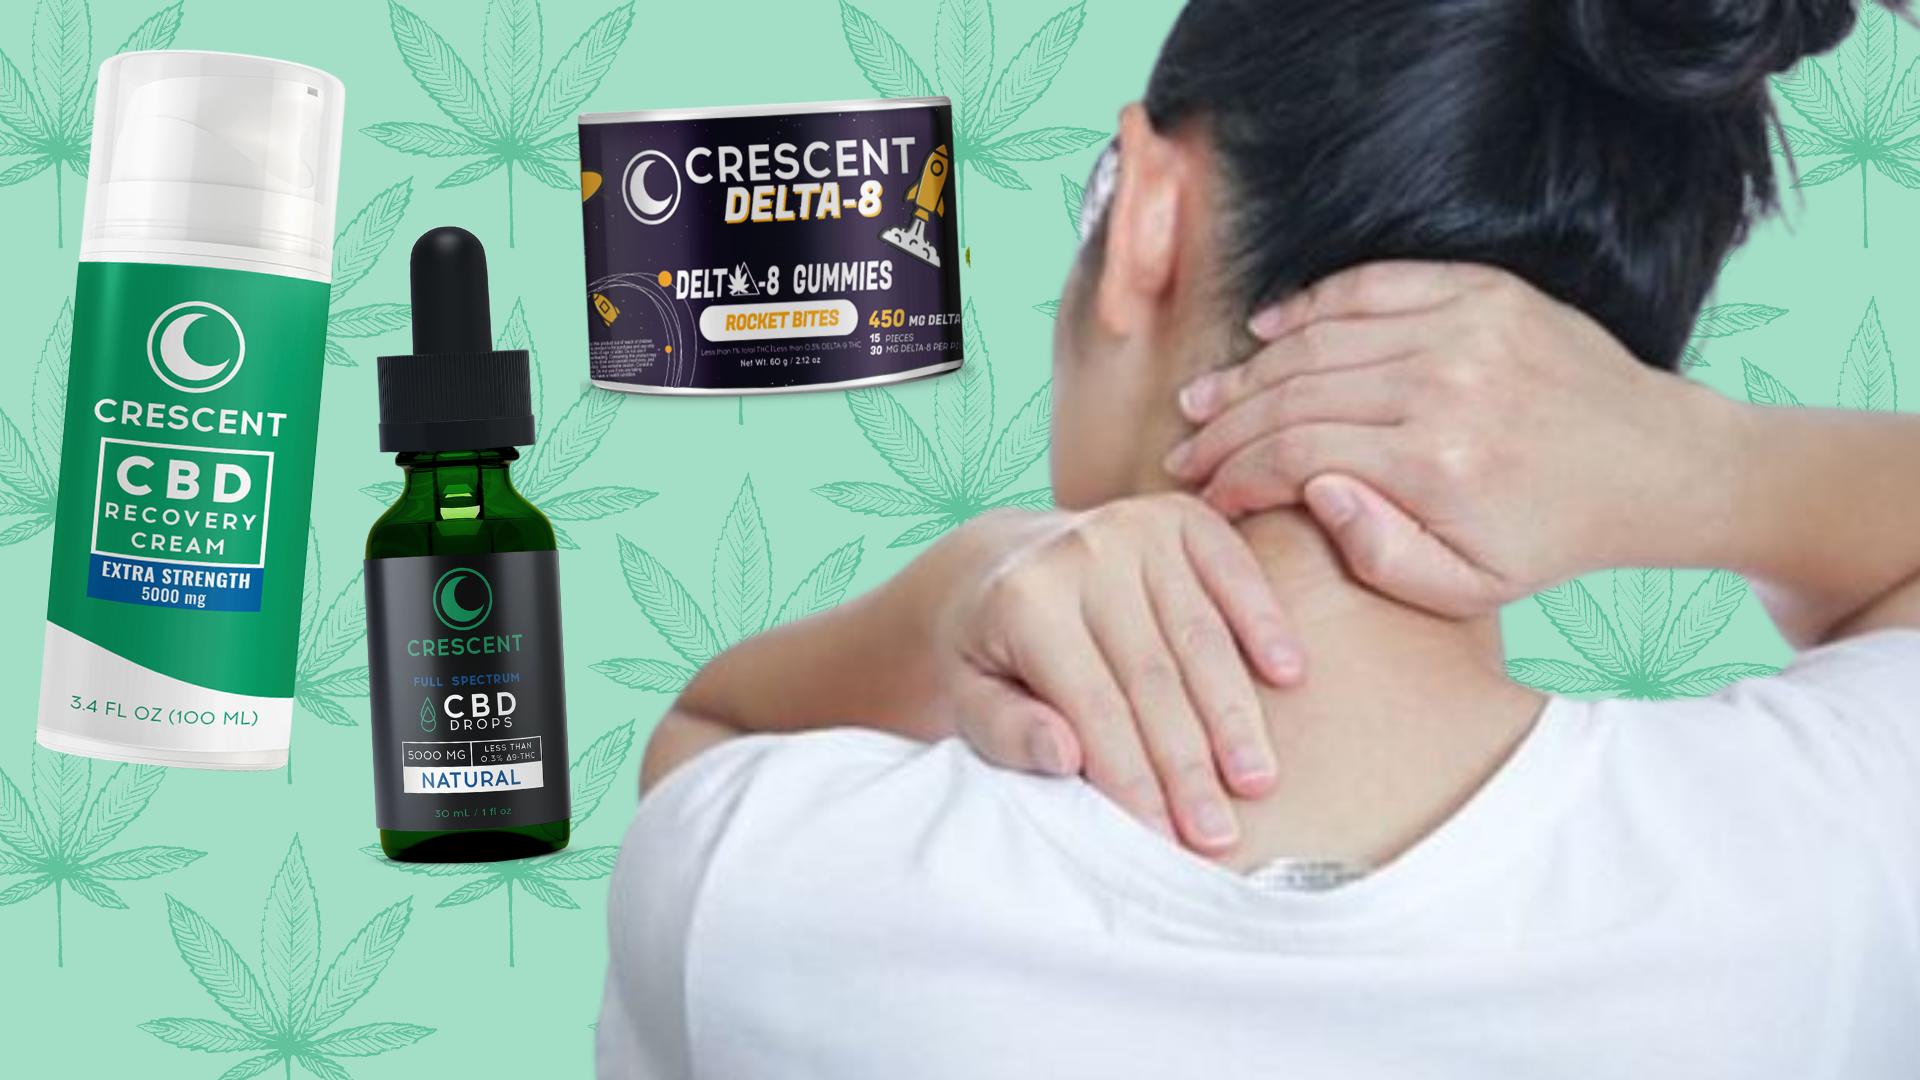 Crescent Canna CBD products for pain relief